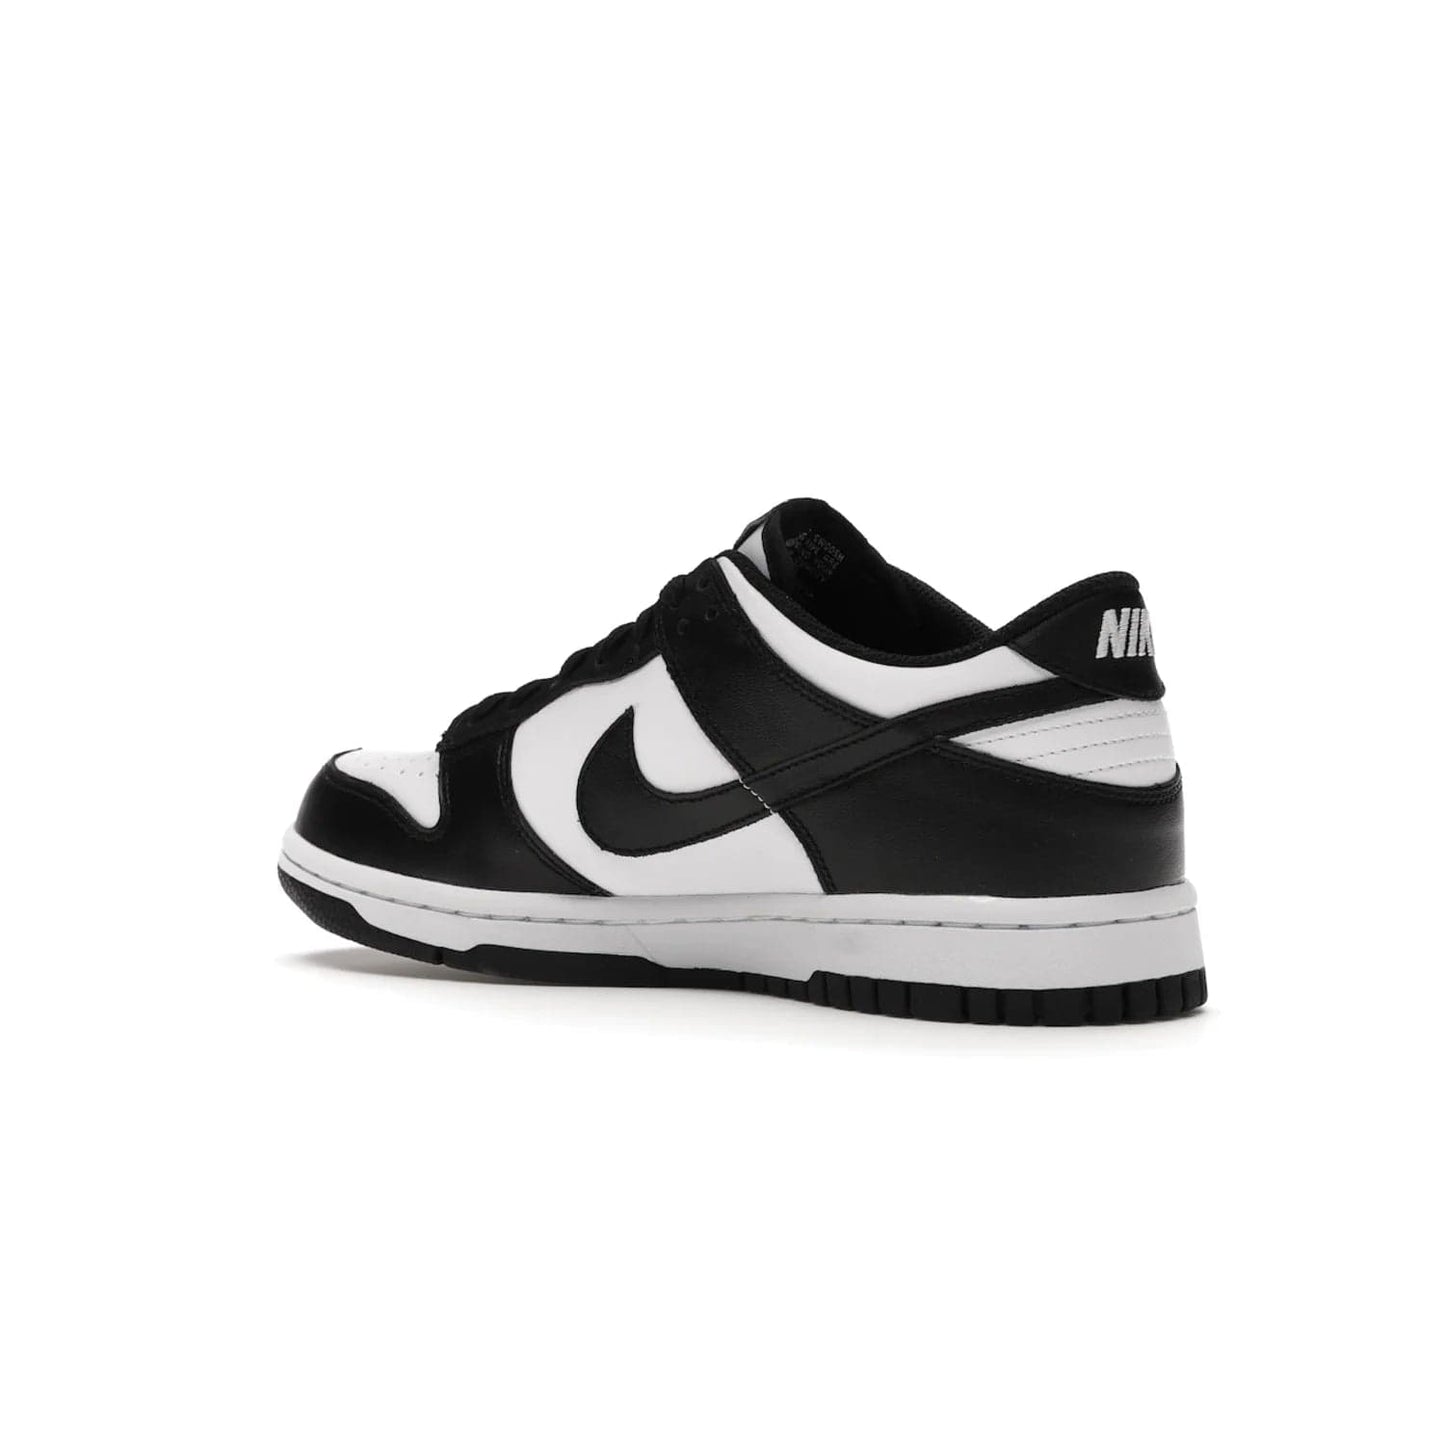 Nike Dunk Low Retro White Black Panda (2021) (GS) - Image 23 - Only at www.BallersClubKickz.com - Upgrade your style with the Nike Dunk Low Retro White Black (GS). Featuring premium leather, iconic Nike text, signature Swoosh logo and striking black/white colorway, this striking silhouette is the perfect mix of style and comfort. Colorway released in March 2021.